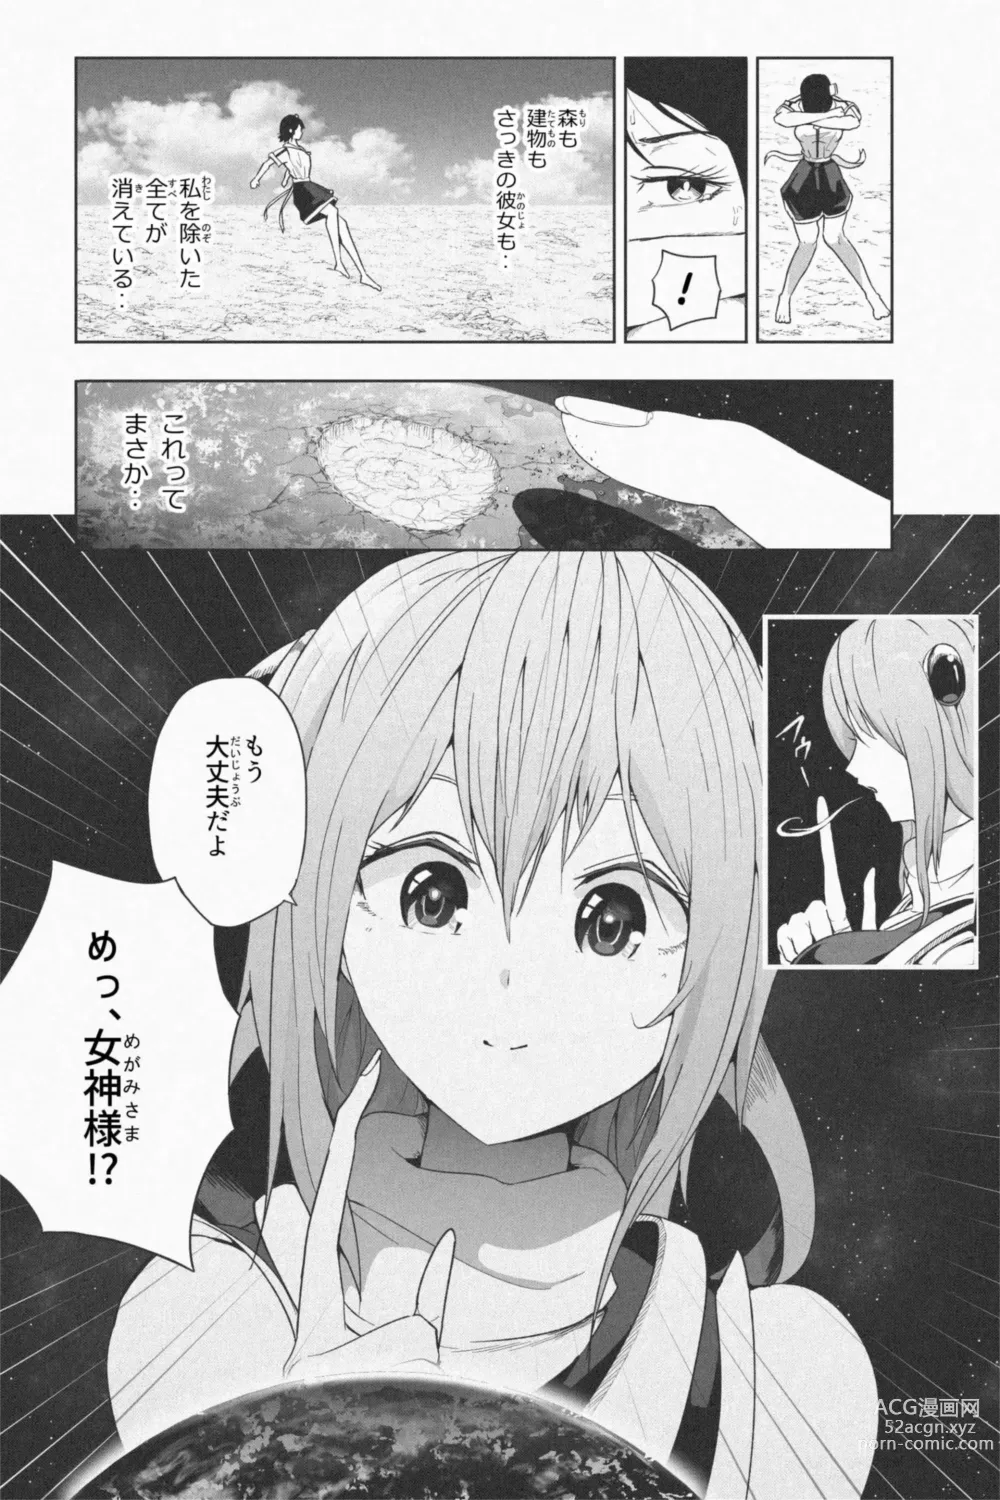 Page 6 of doujinshi NEW Chikyuu de Asobo - NEW Play with earth